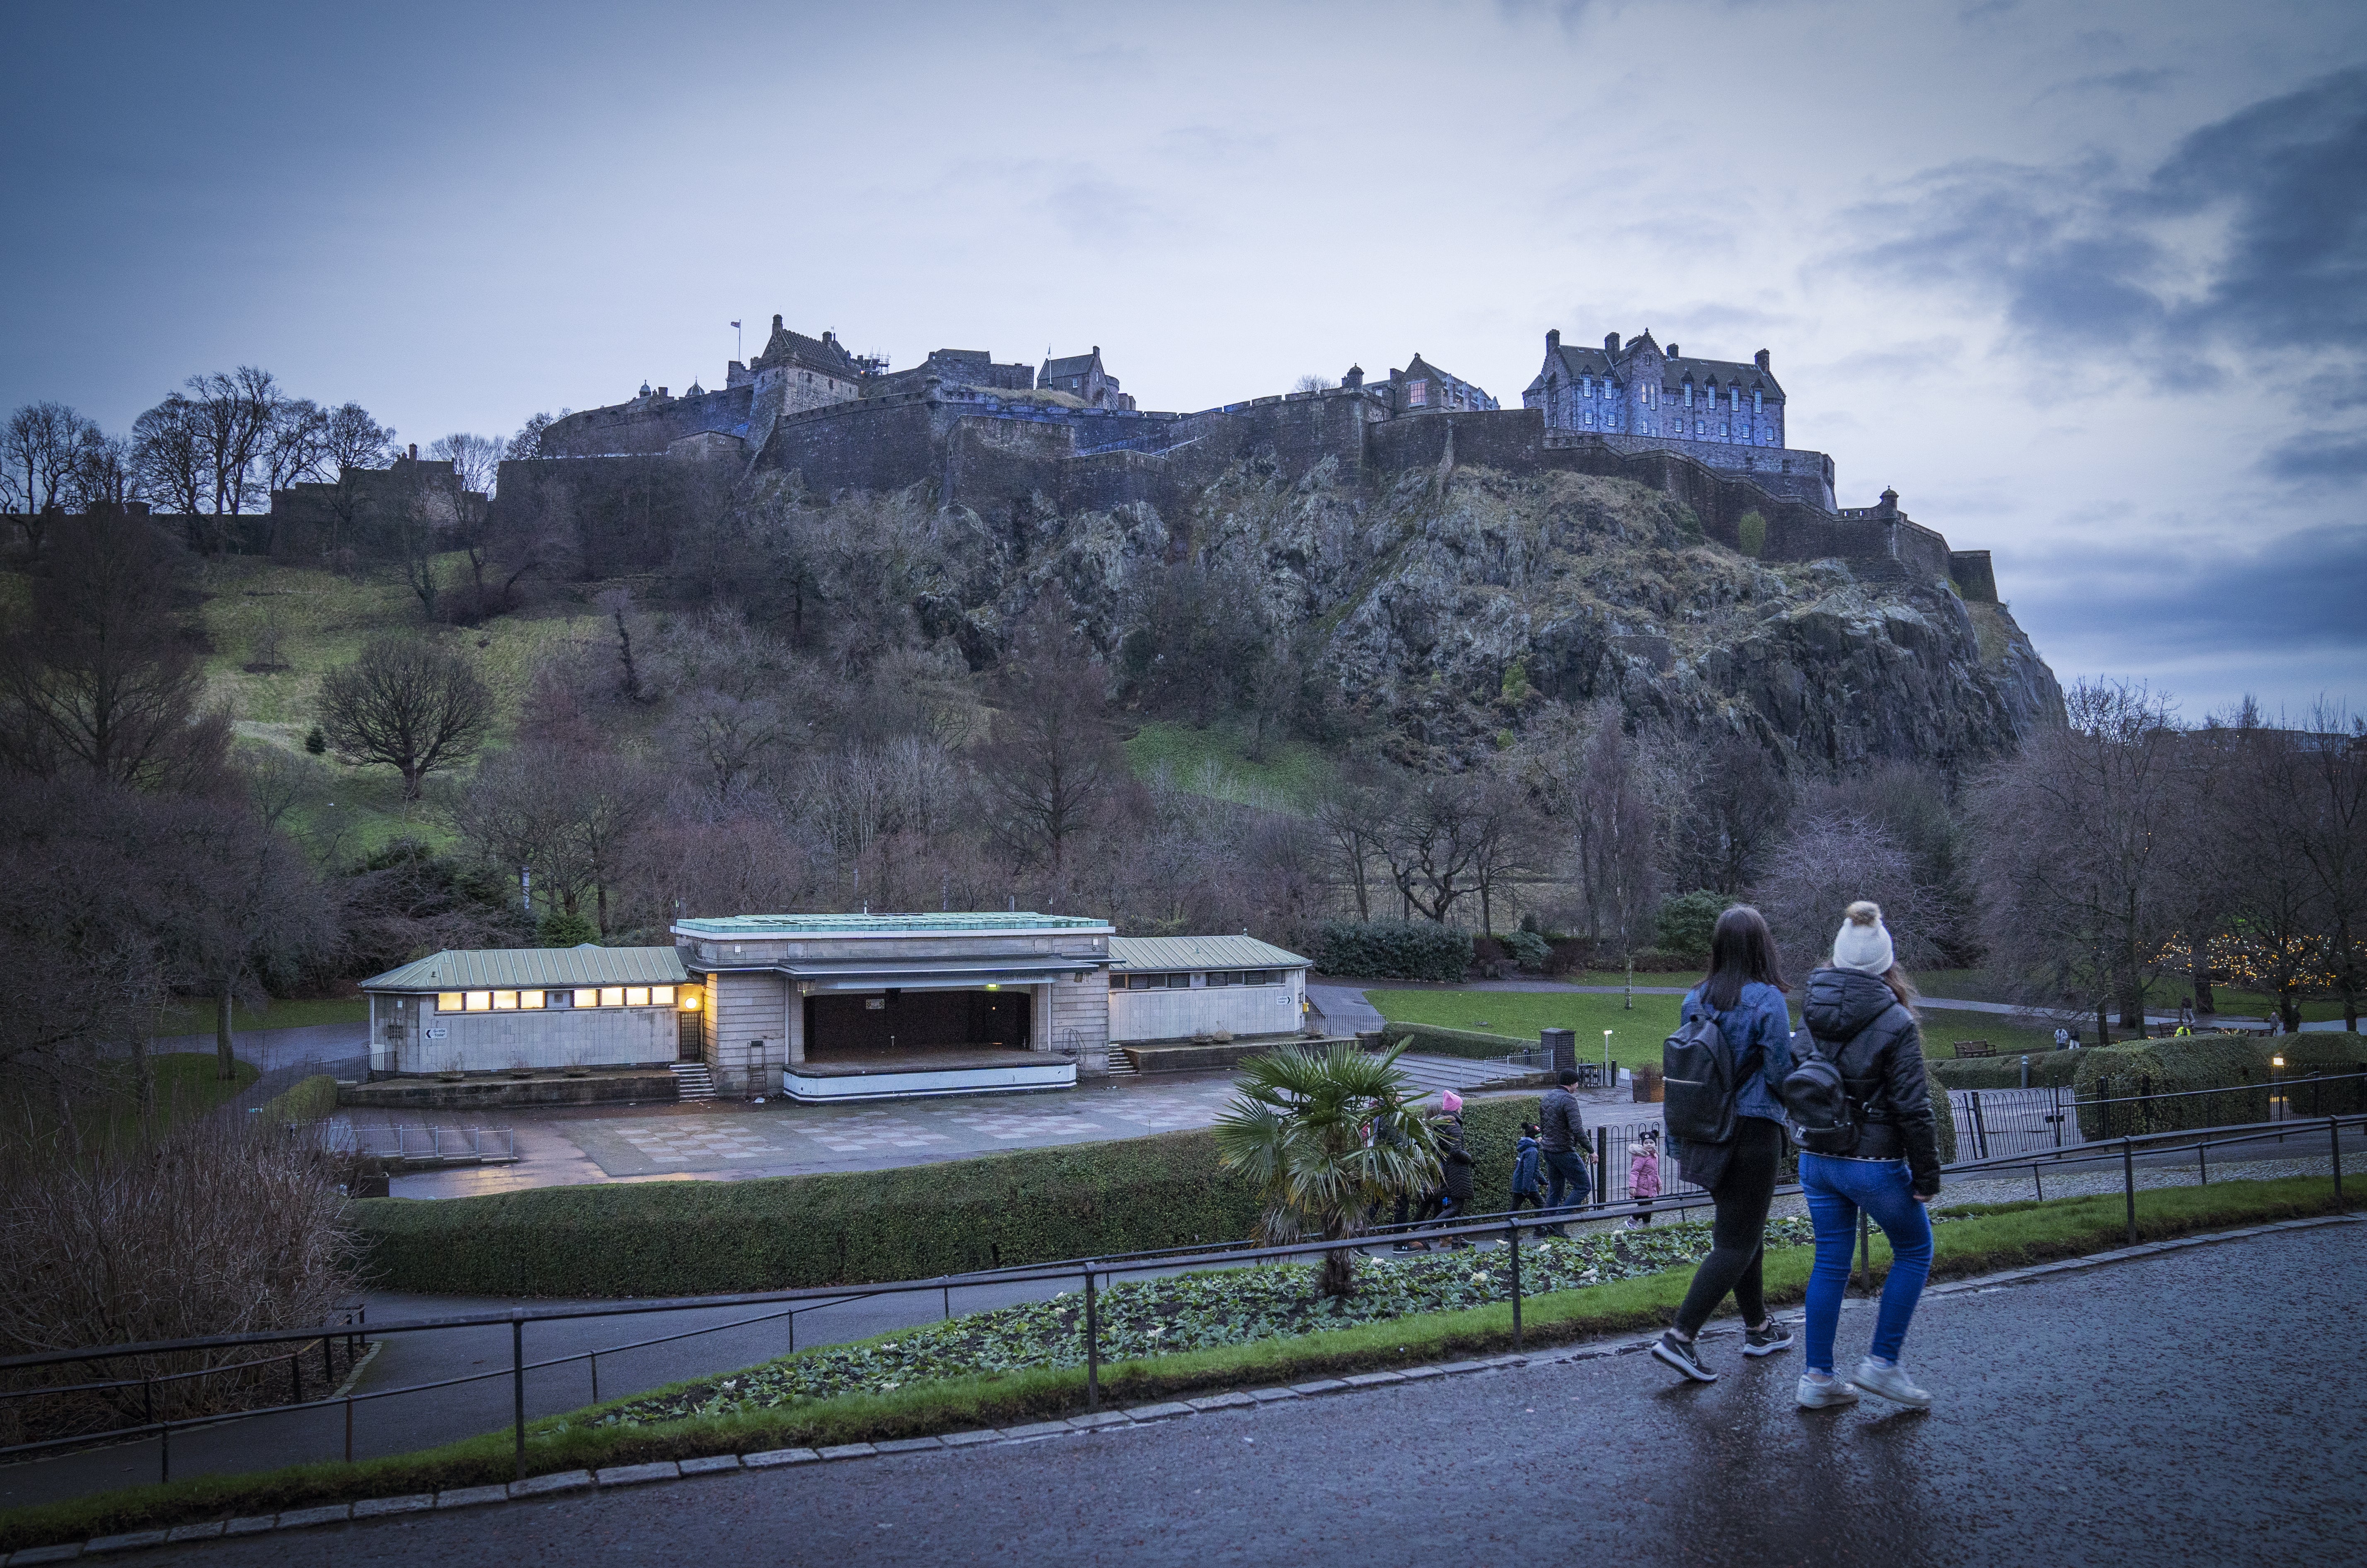 Members of the public found the device in Edinburgh’s Princes Street Gardens